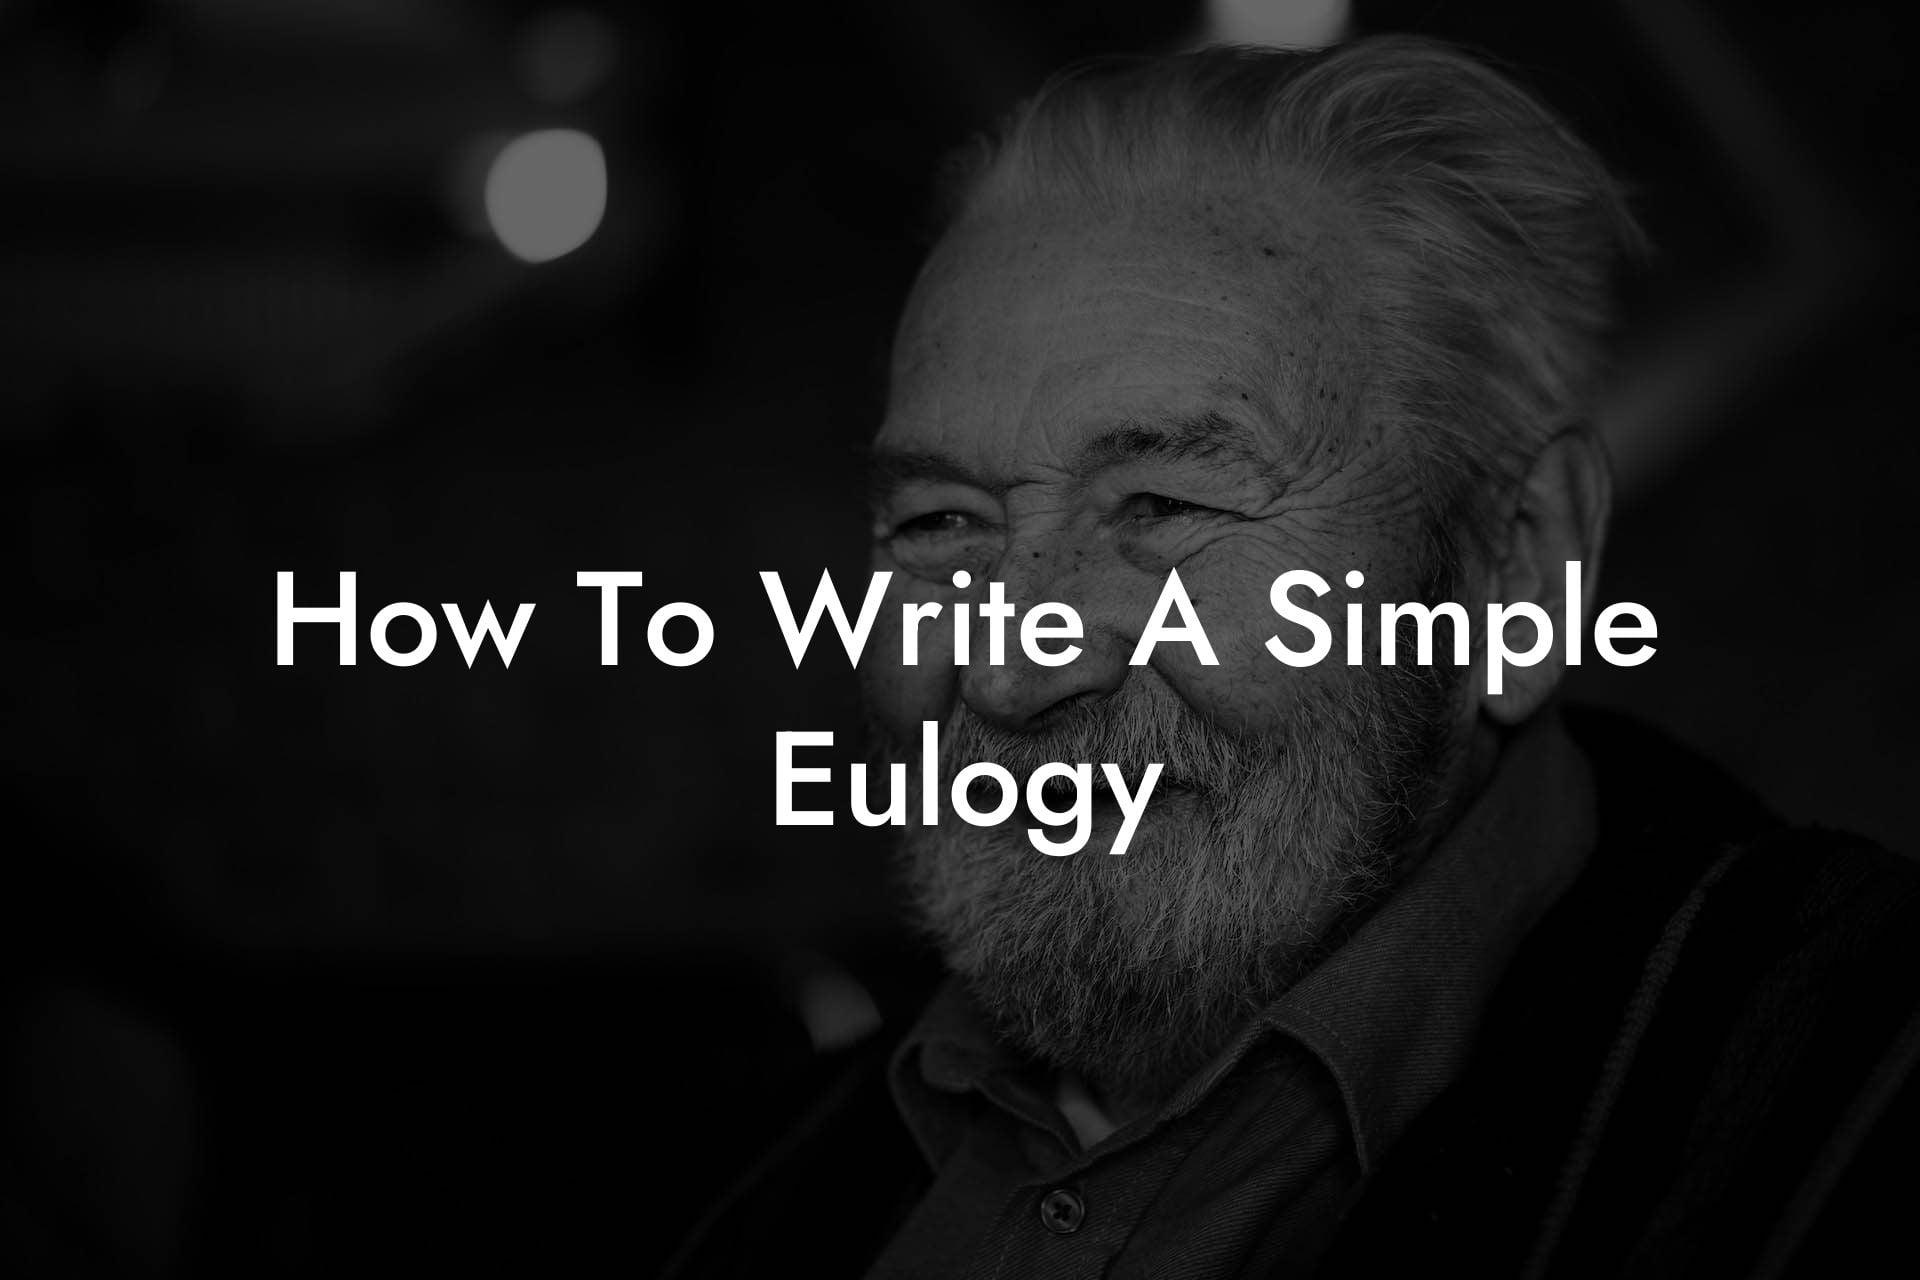 How To Write A Simple Eulogy